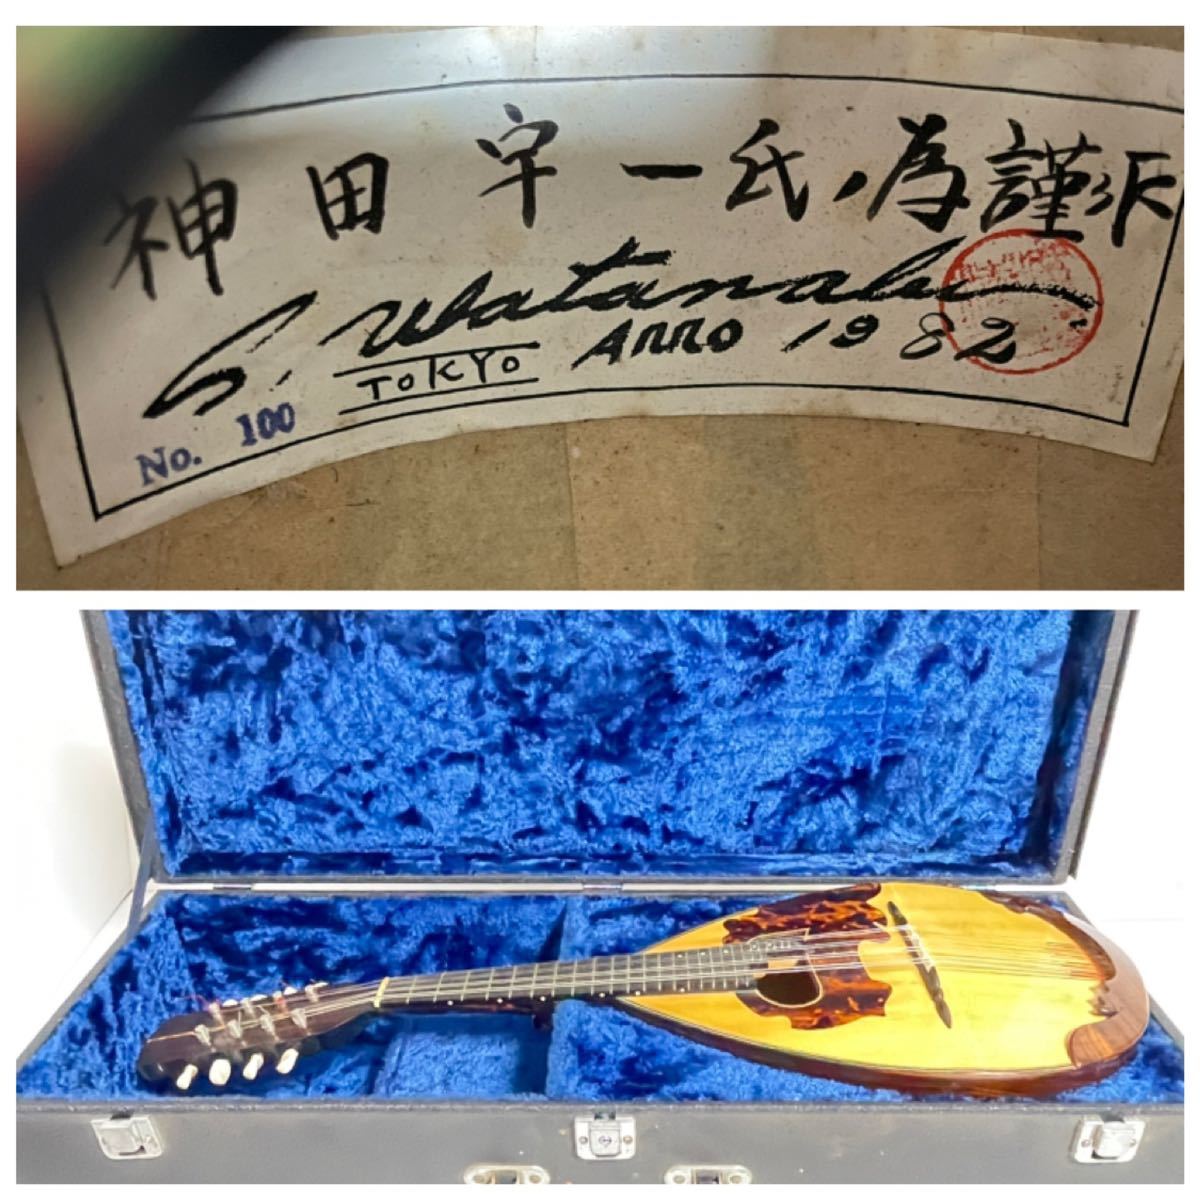  Watanabe Watanabe. included neck special order mandolin No.100 1982 today only cut the price! first come, first served.!